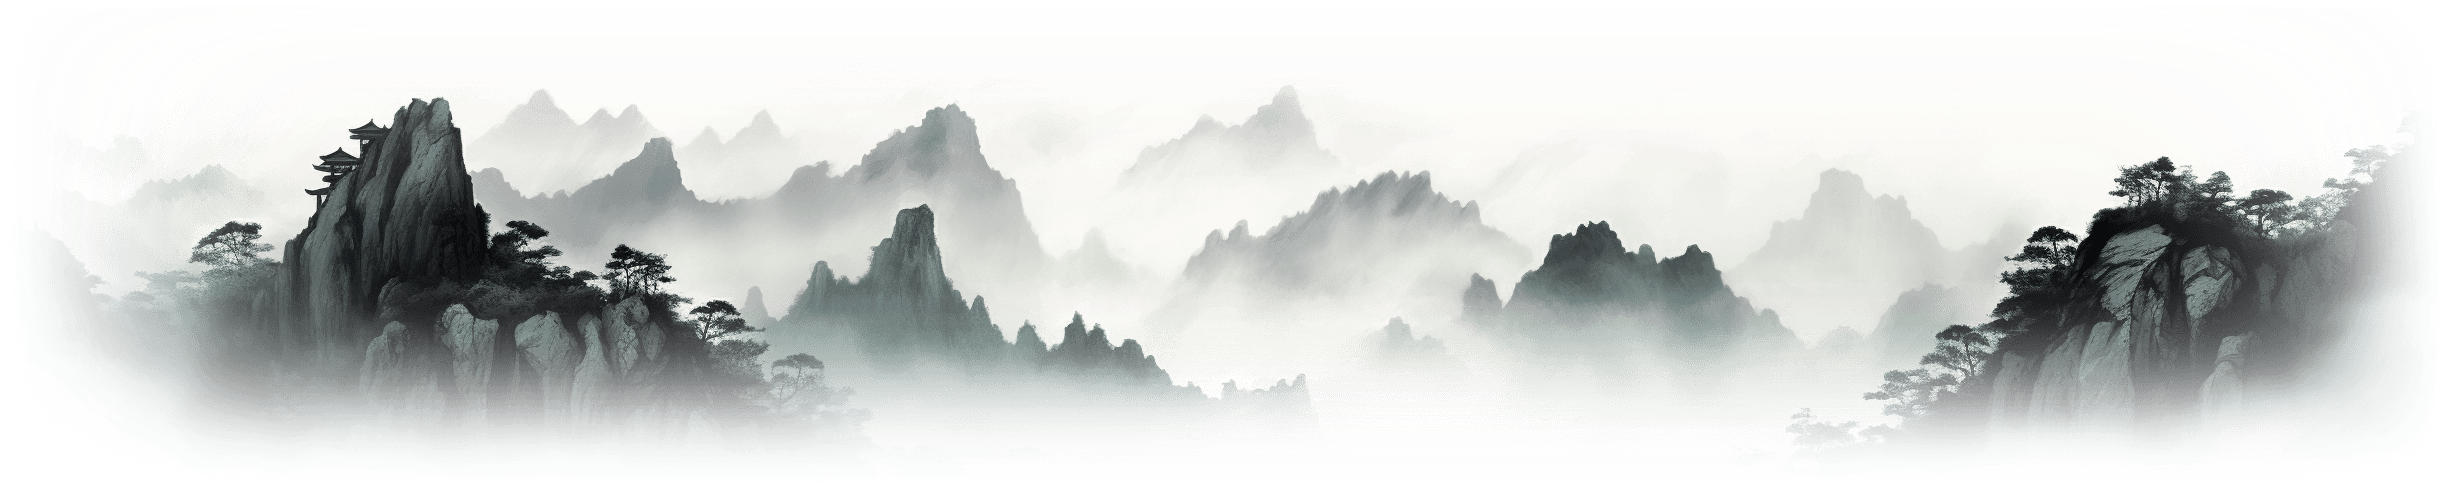 Serene view of mountains shrouded in mist